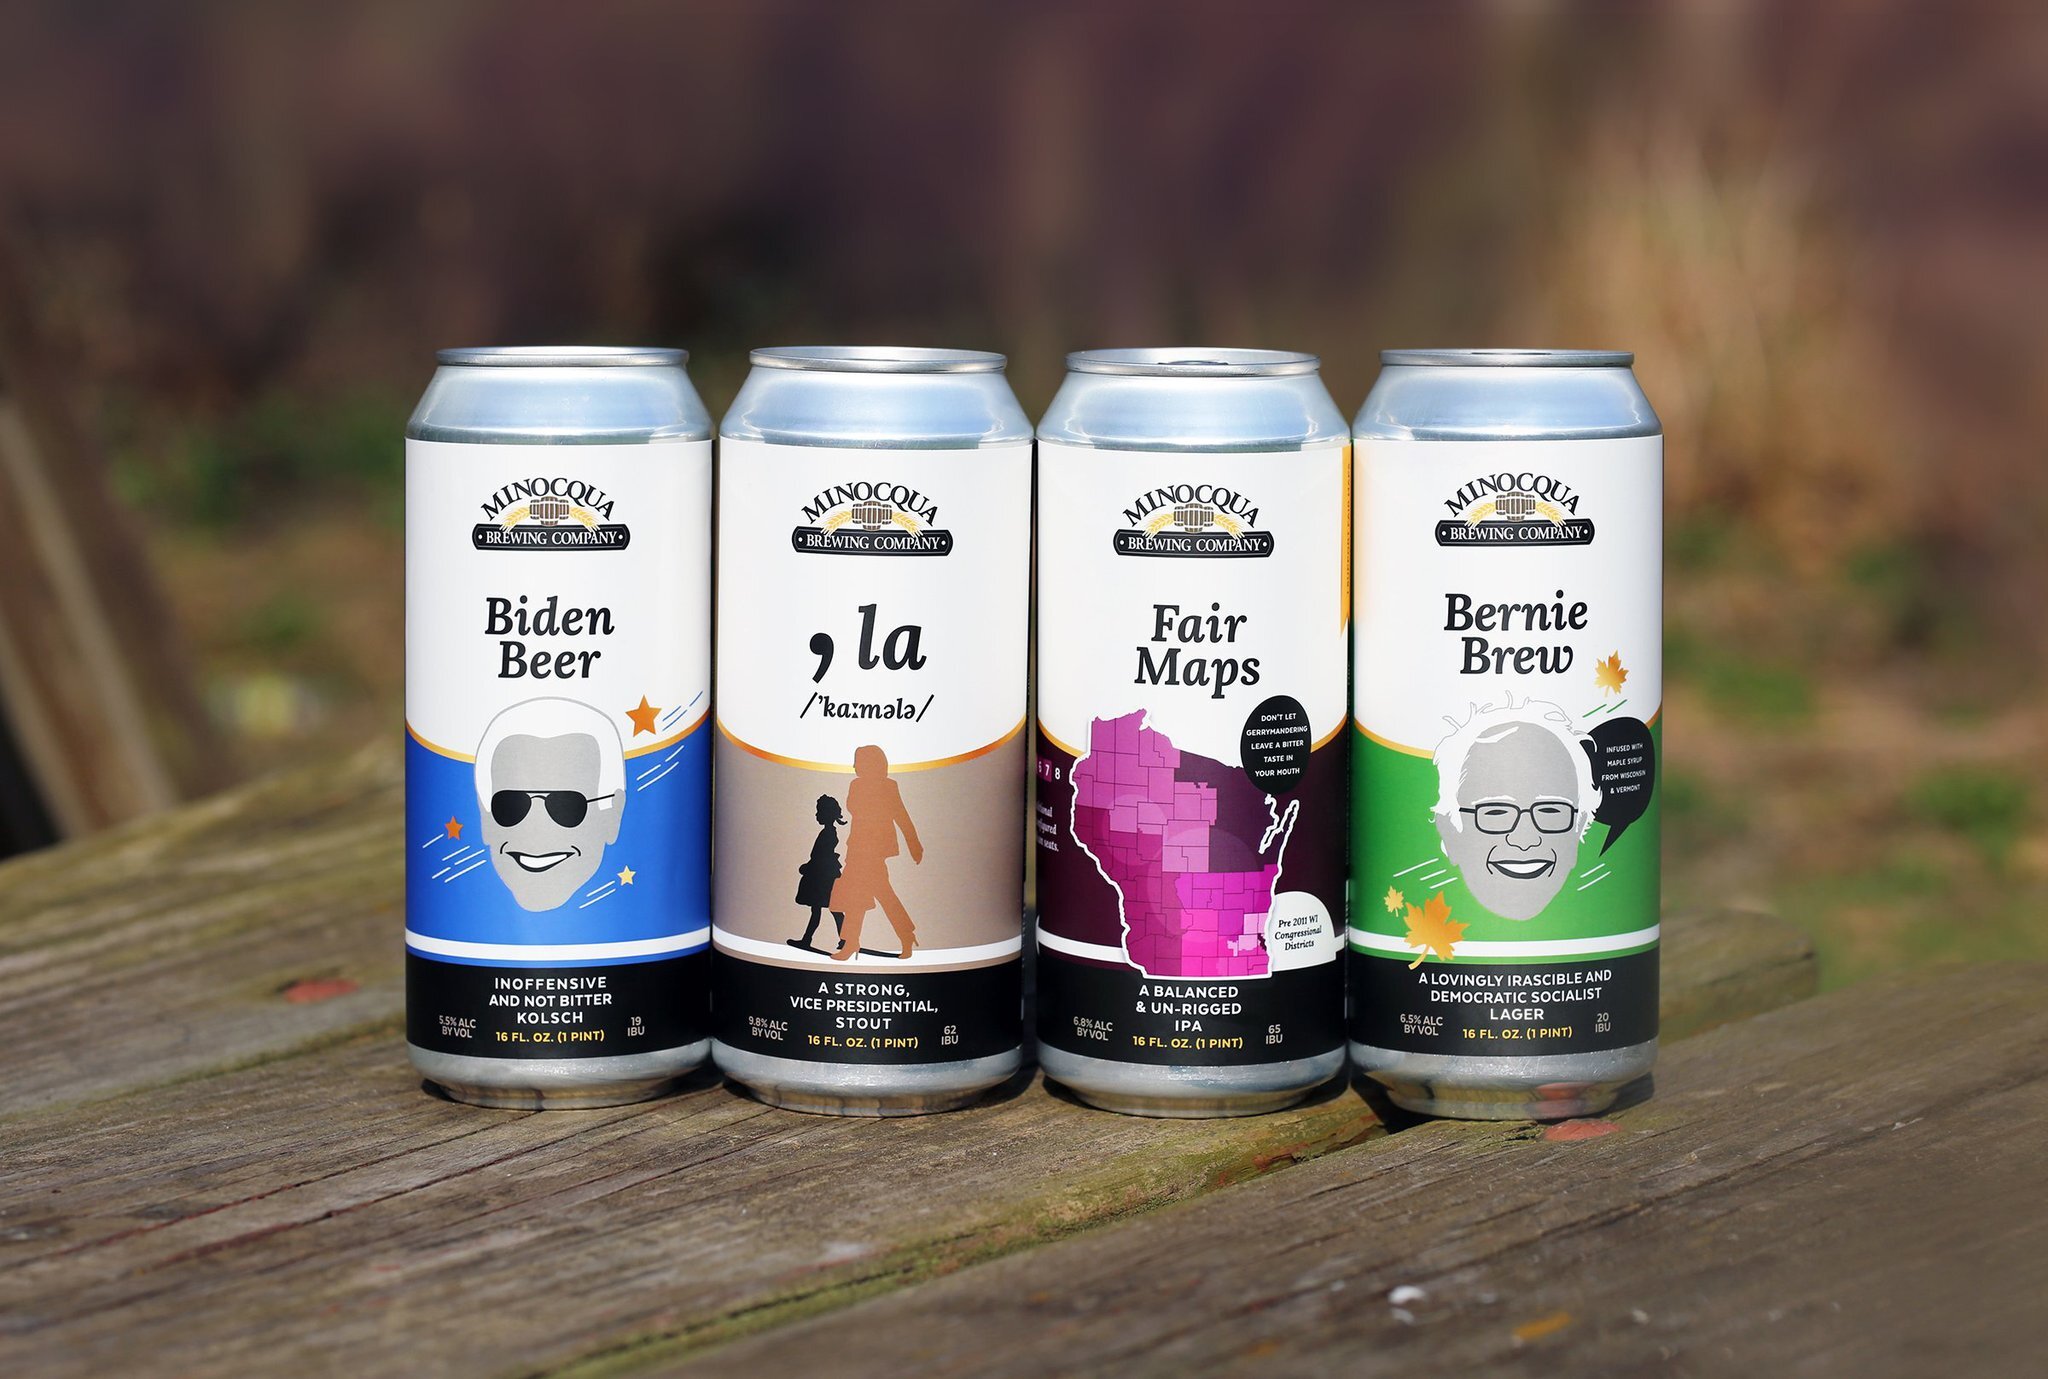 Some of the beers sold by the Minocqua Brewing Company in Wisconsin, whose owner launched a super PAC that's funding lawsuits to force school districts to require masks and other measures to stem the spread of COVID-19. (Courtesy)